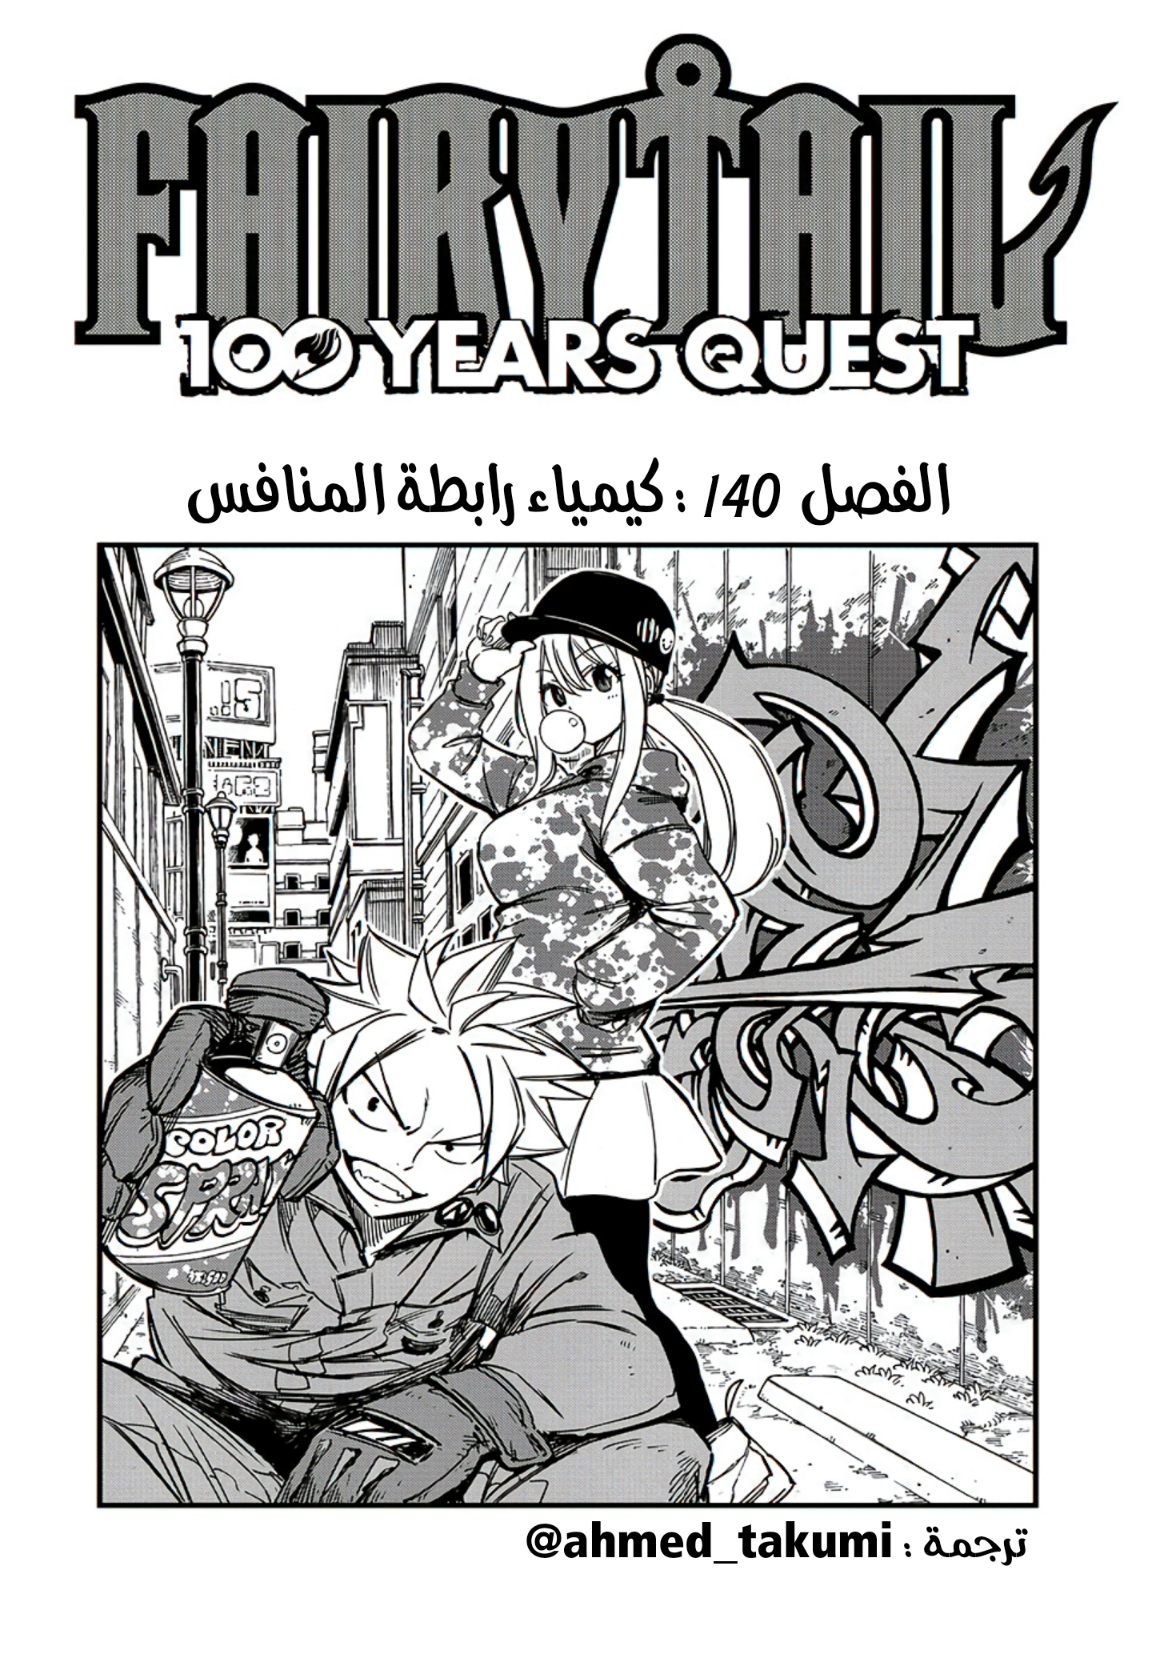 Fairy Tail 100 Years Quest: Chapter 140 - Page 1